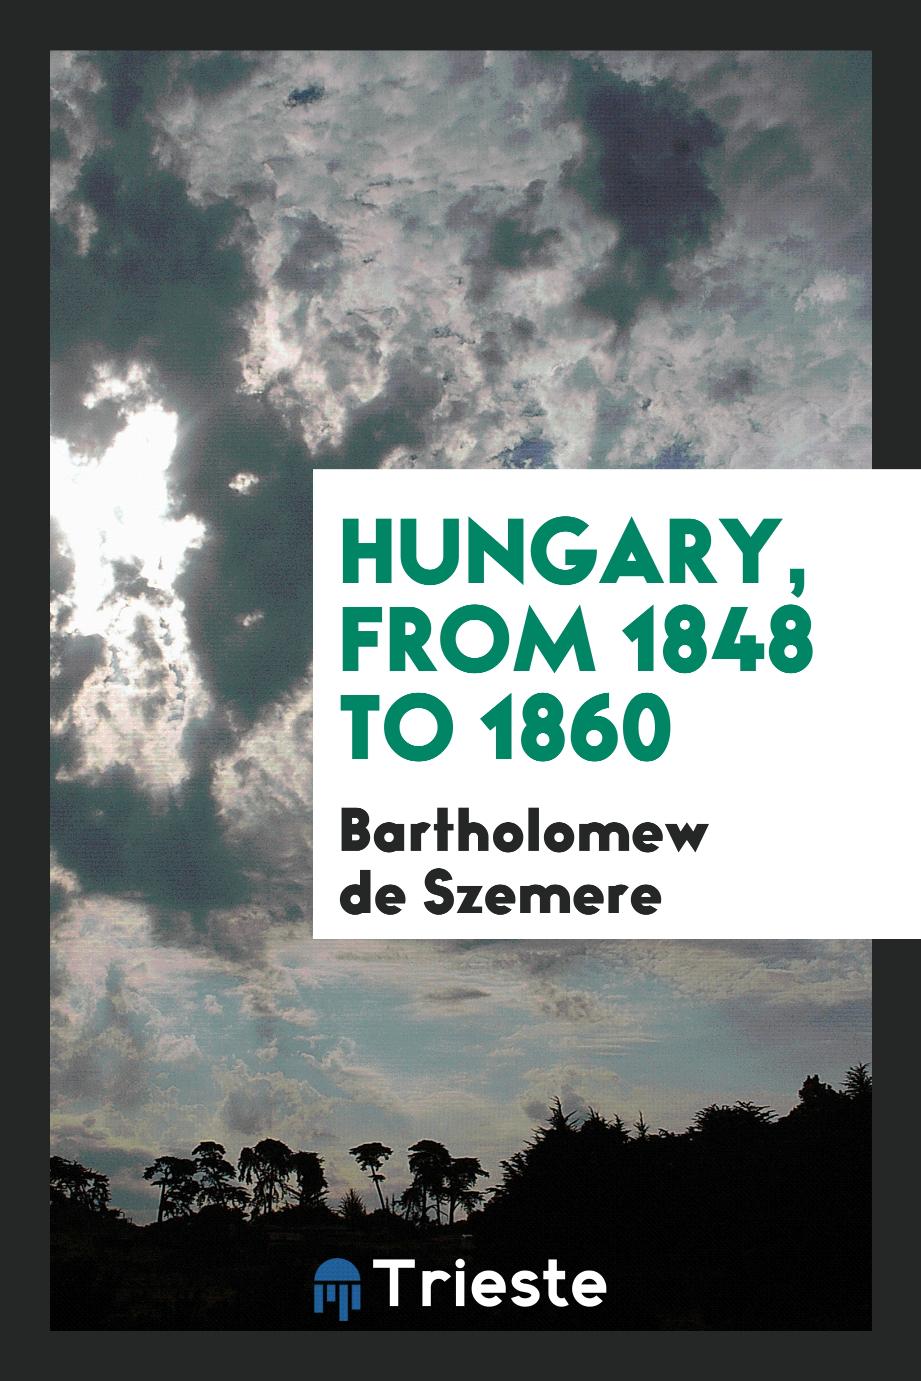 Hungary, from 1848 to 1860